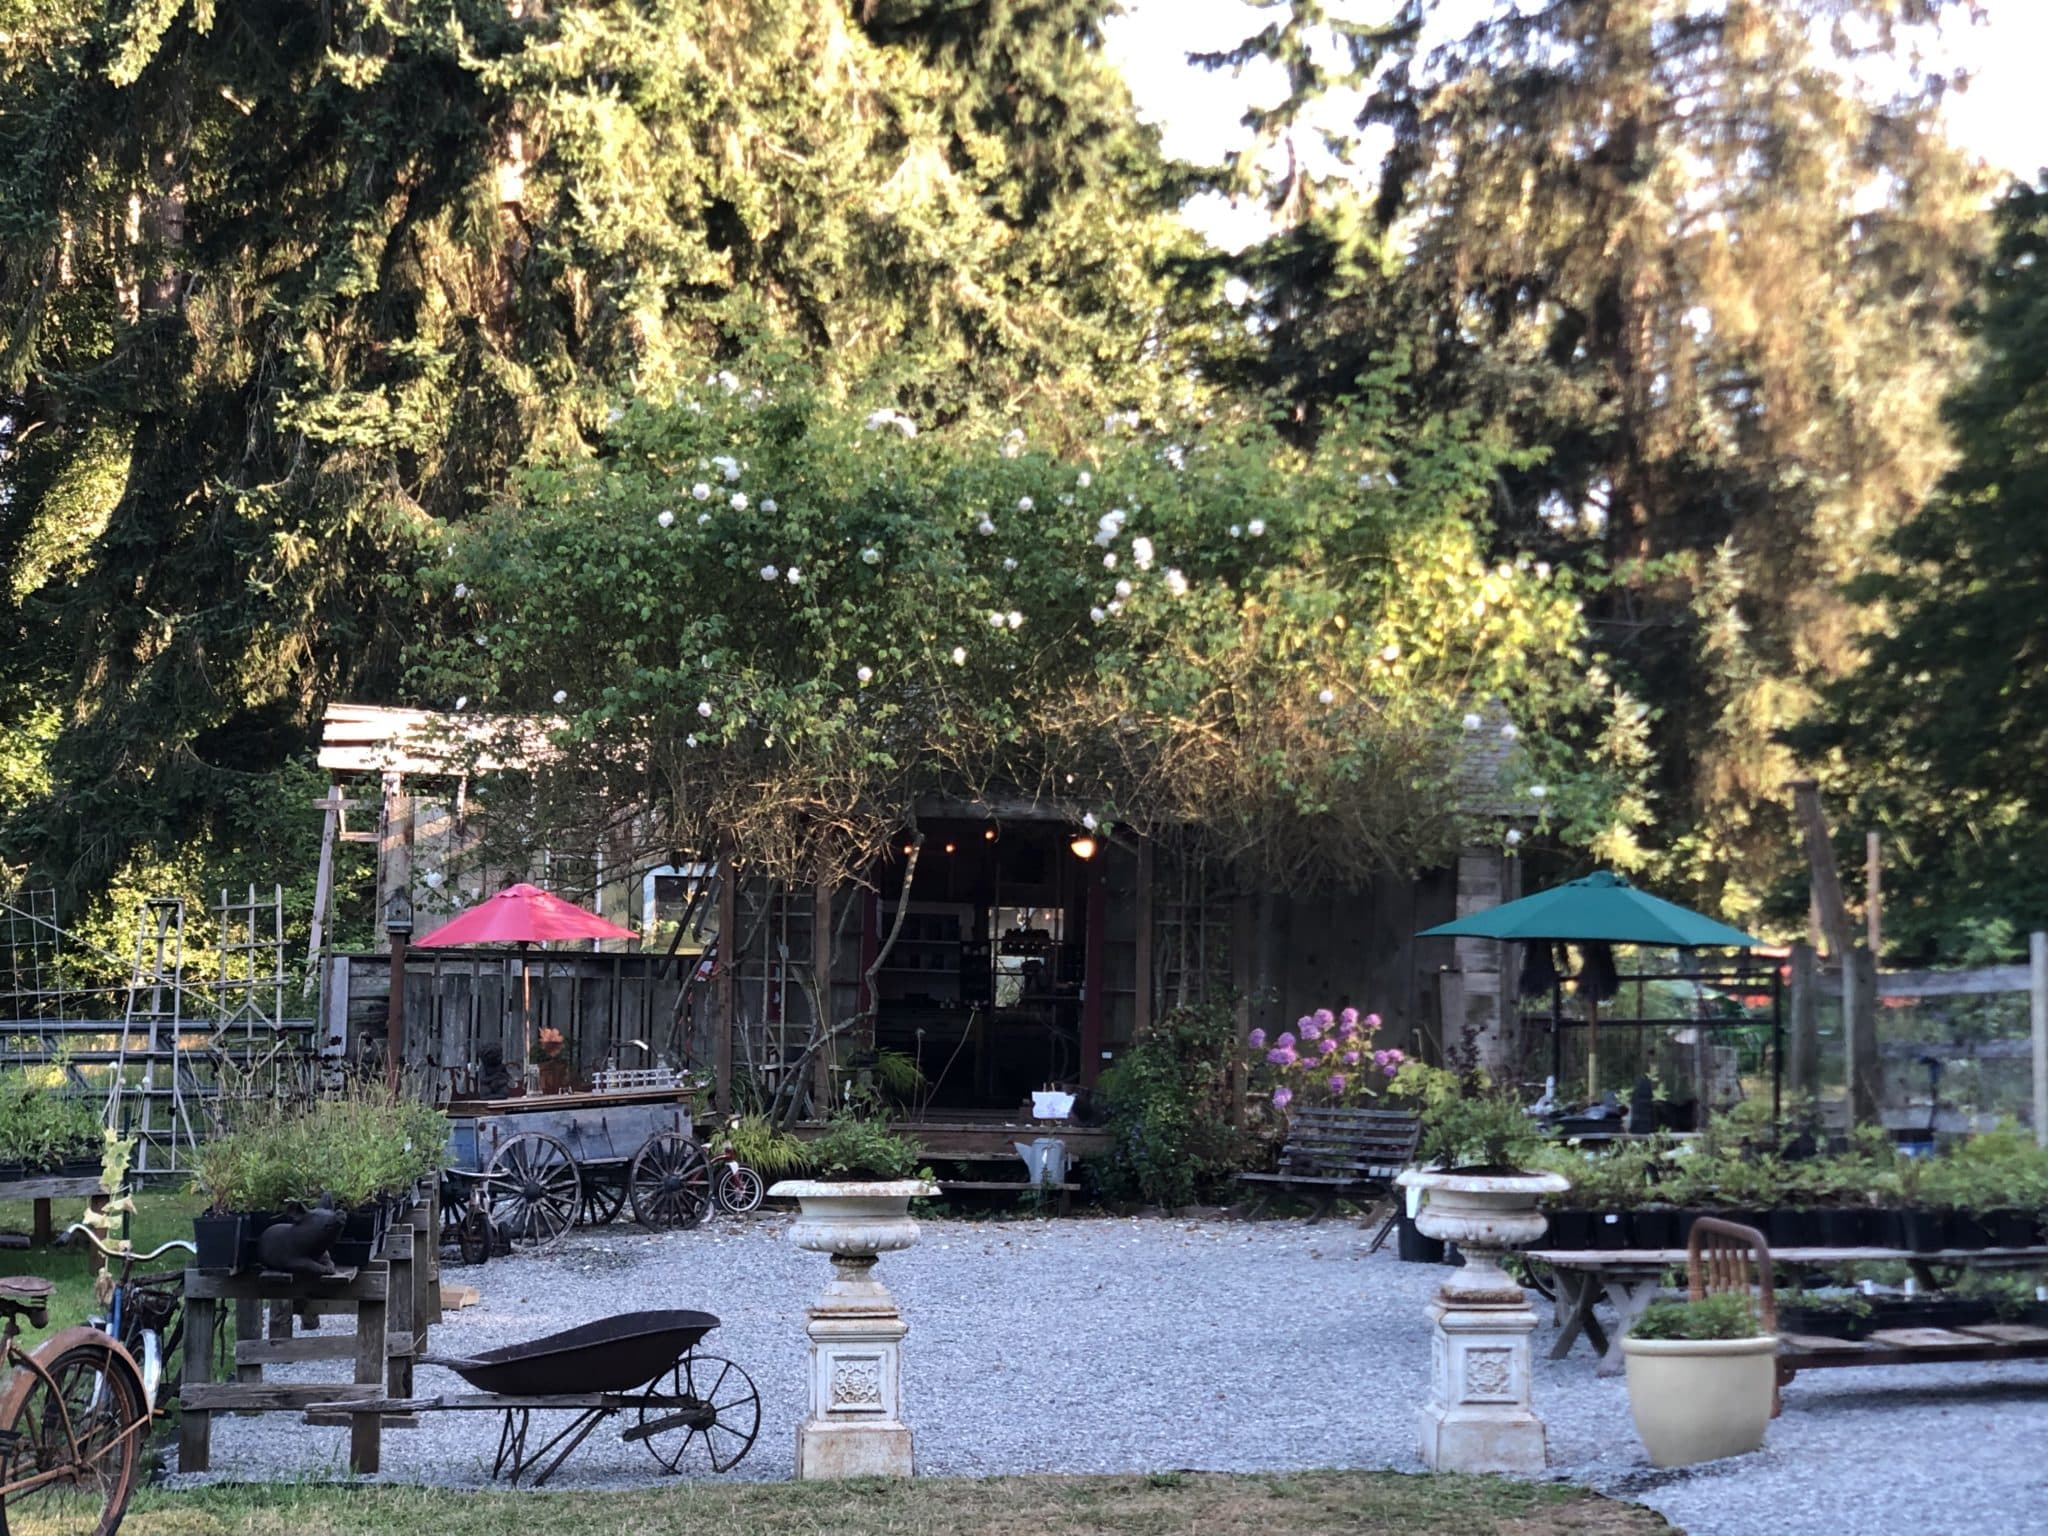 View at the Chocolate Flower Farm on Whidbey Island